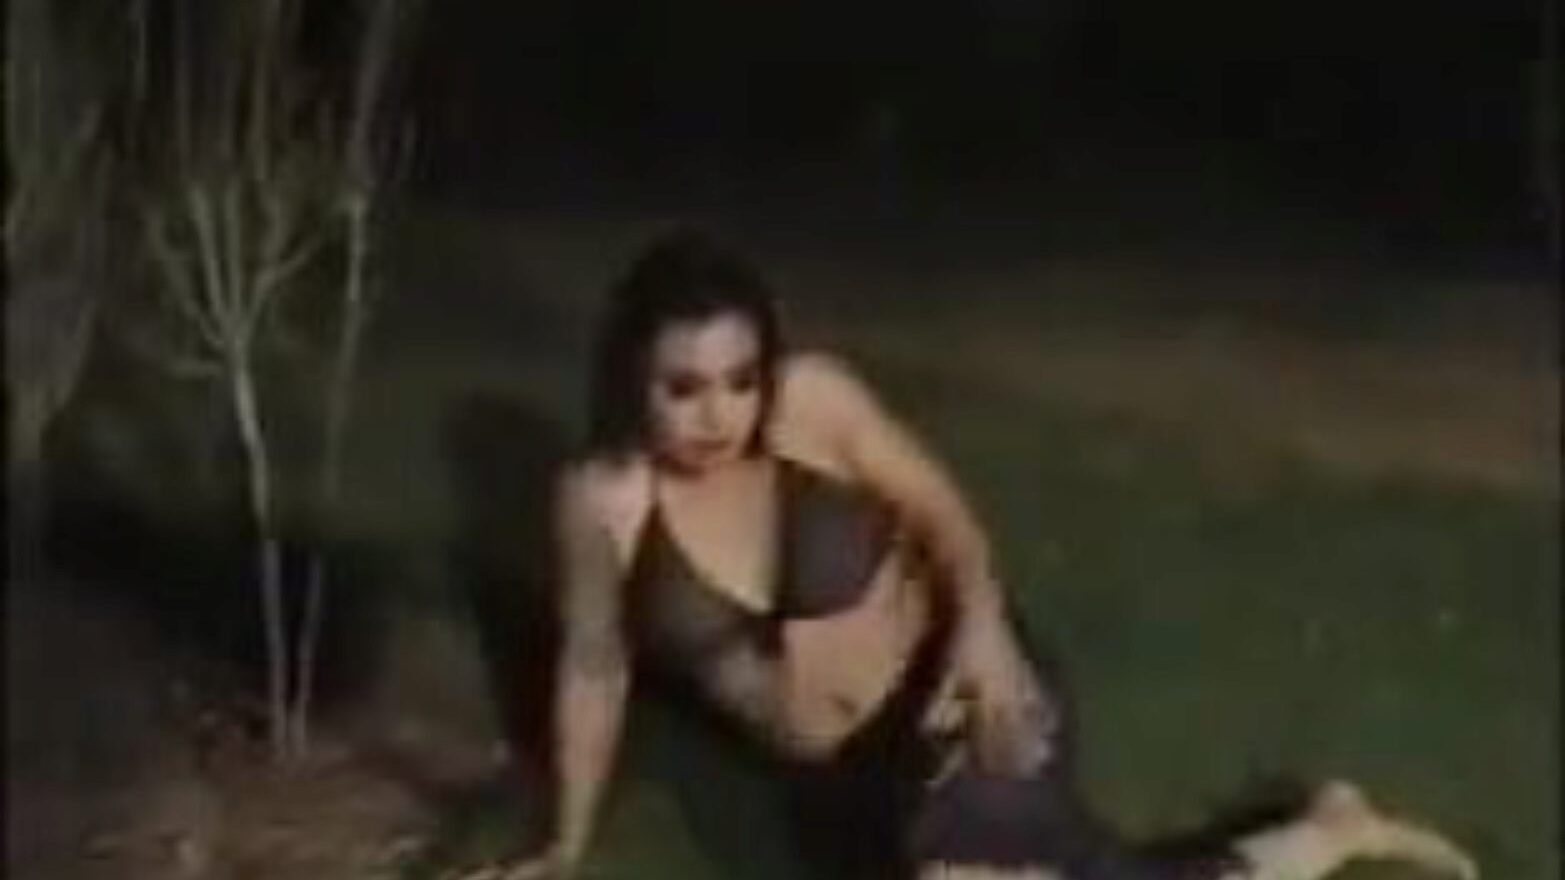 Pakistani Hottie: Free Pakistani Mobile Tube Porn Episode e9 See Pakistani Honey tube hookup movie for free-for-all on xHamster, with the greatest bevy of Pakistani Mobile Tube Free Pakistani Xxx & Mobile Pakistani pornography movie sequences